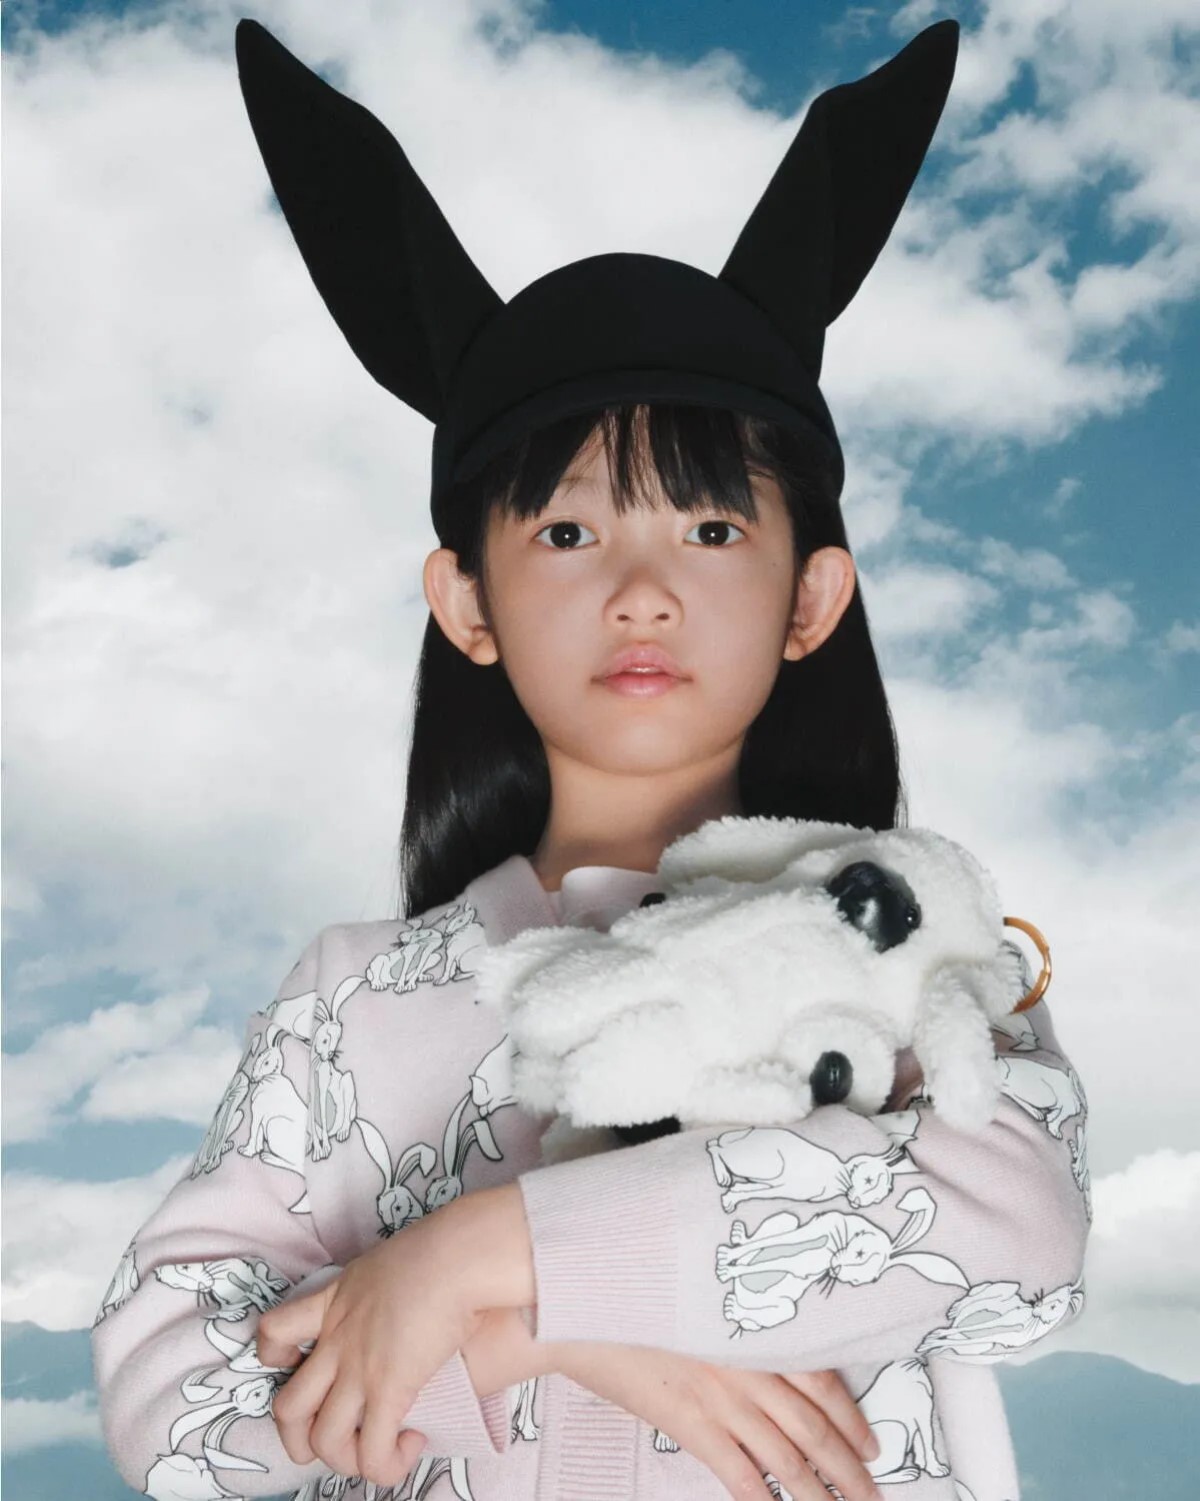 Burberry unveils “Year of the Rabbit” playful capsule